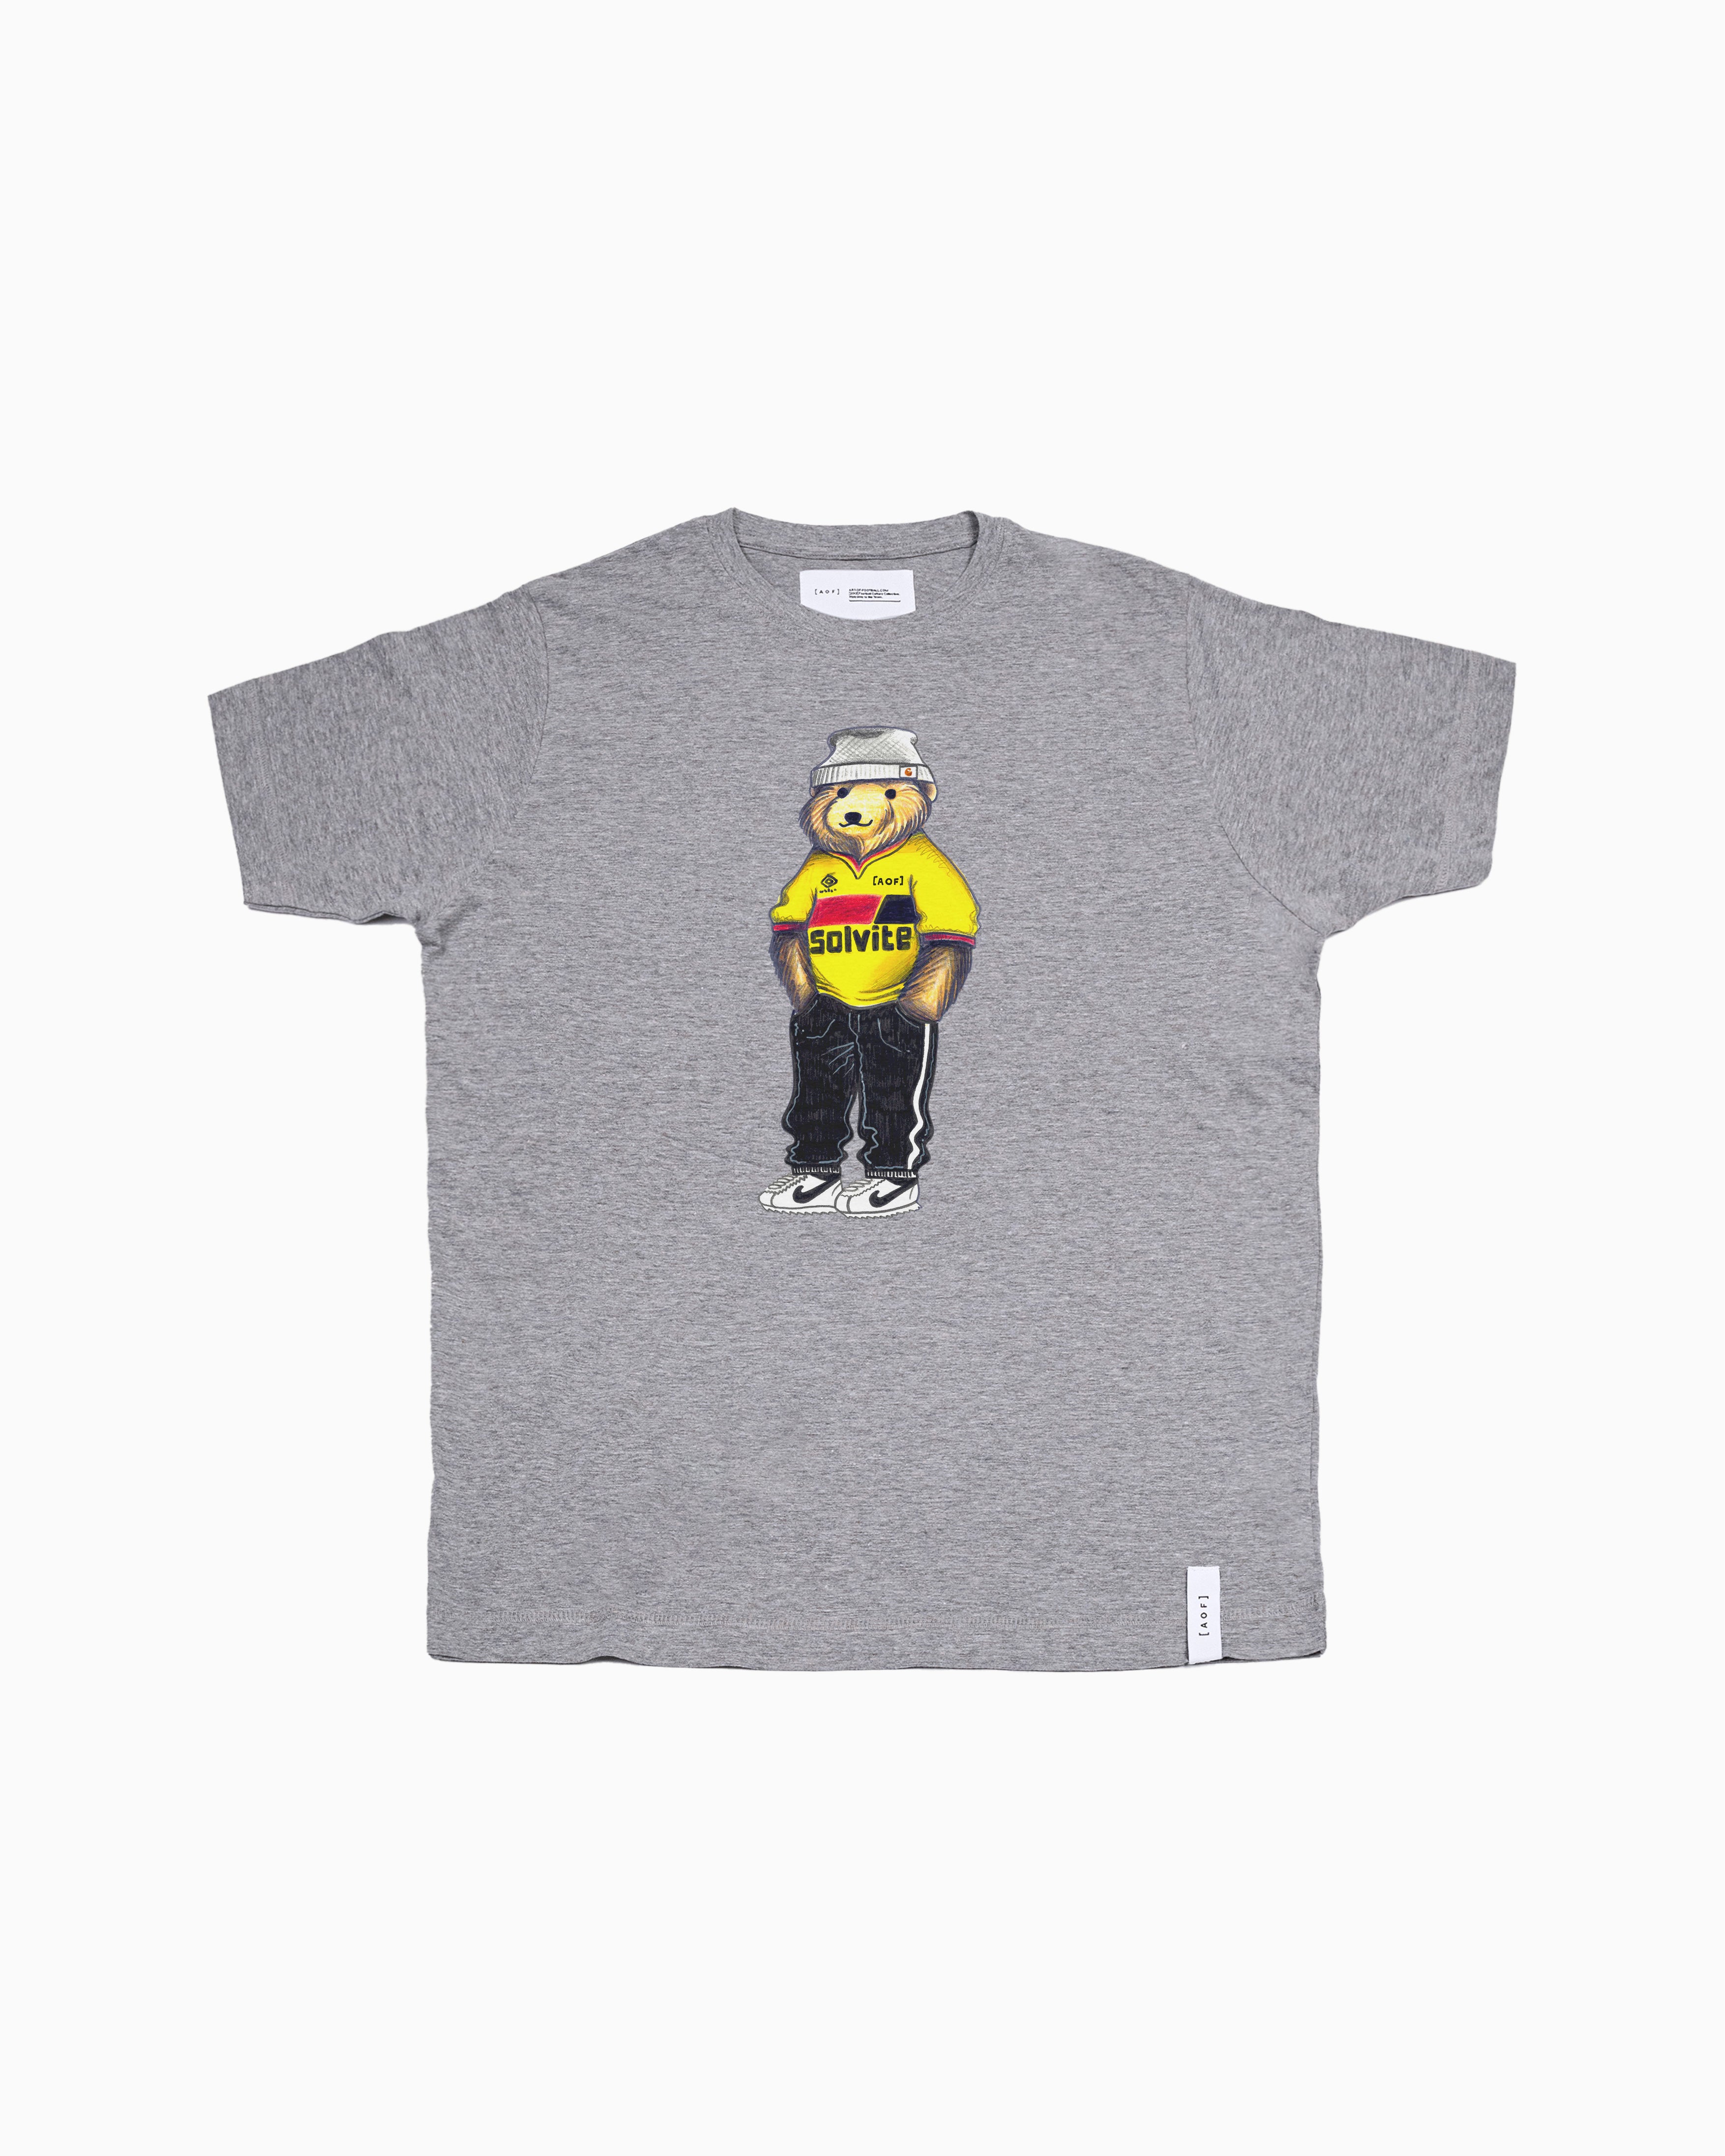 Pickles The Hornet - Tee or Sweat